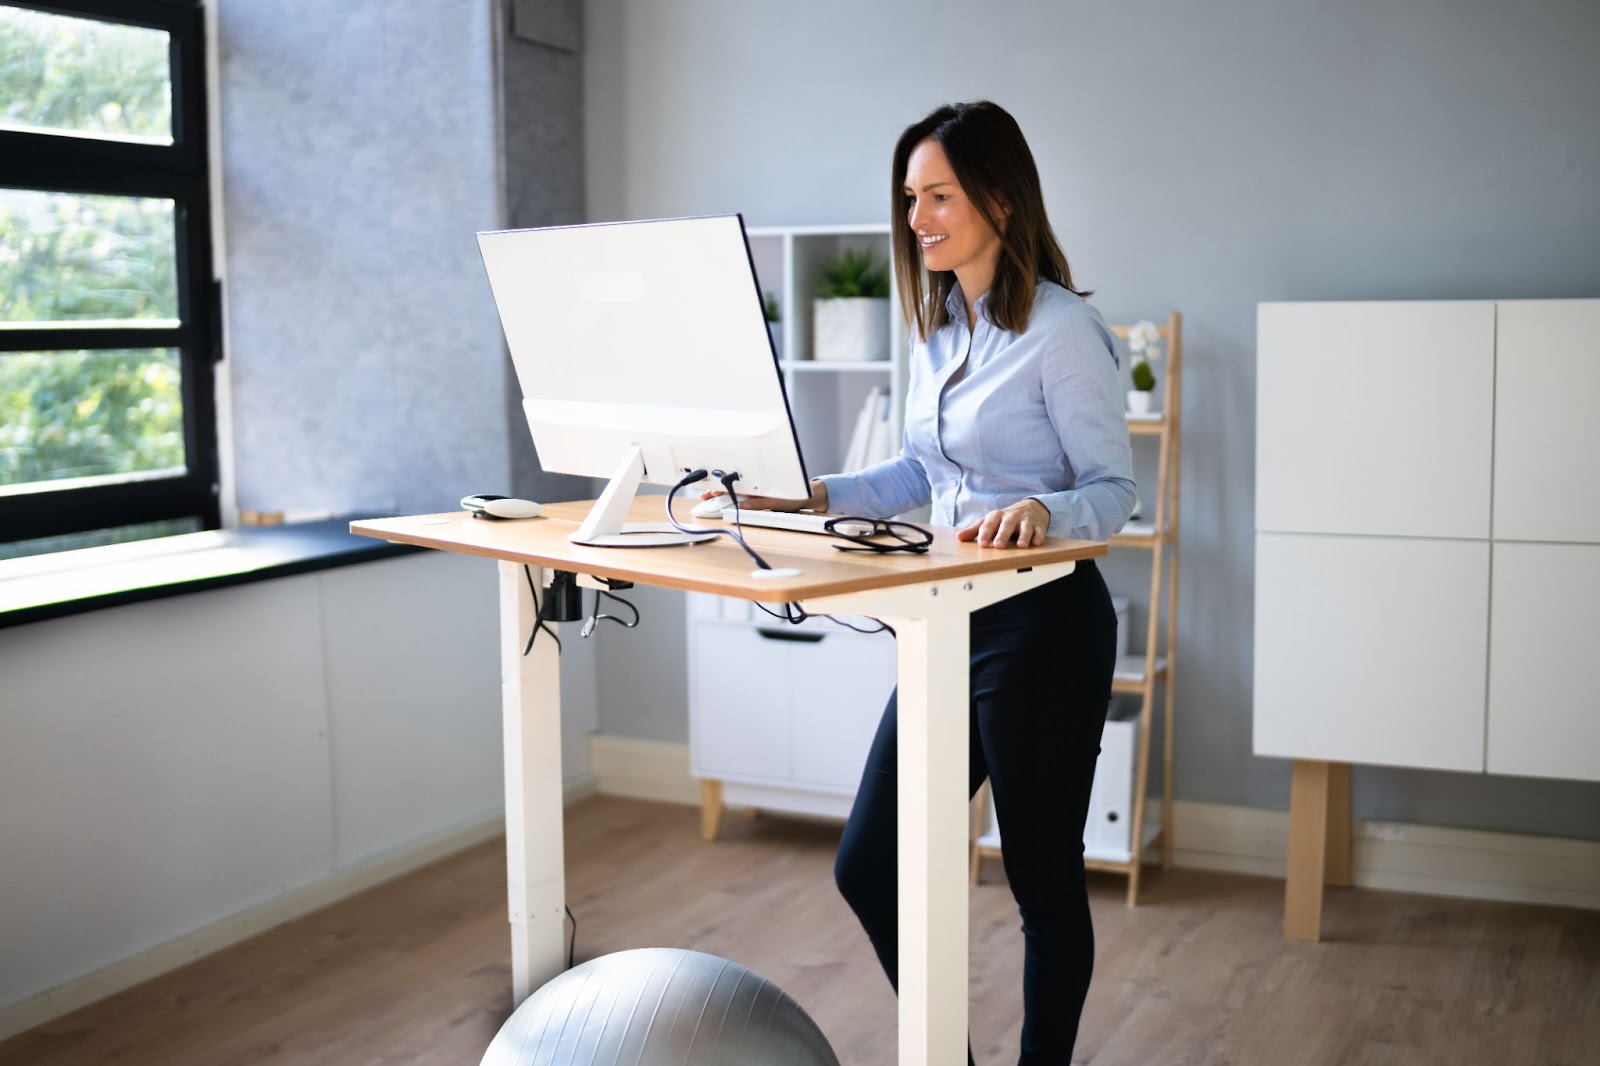 Smiling woman using a standing desk